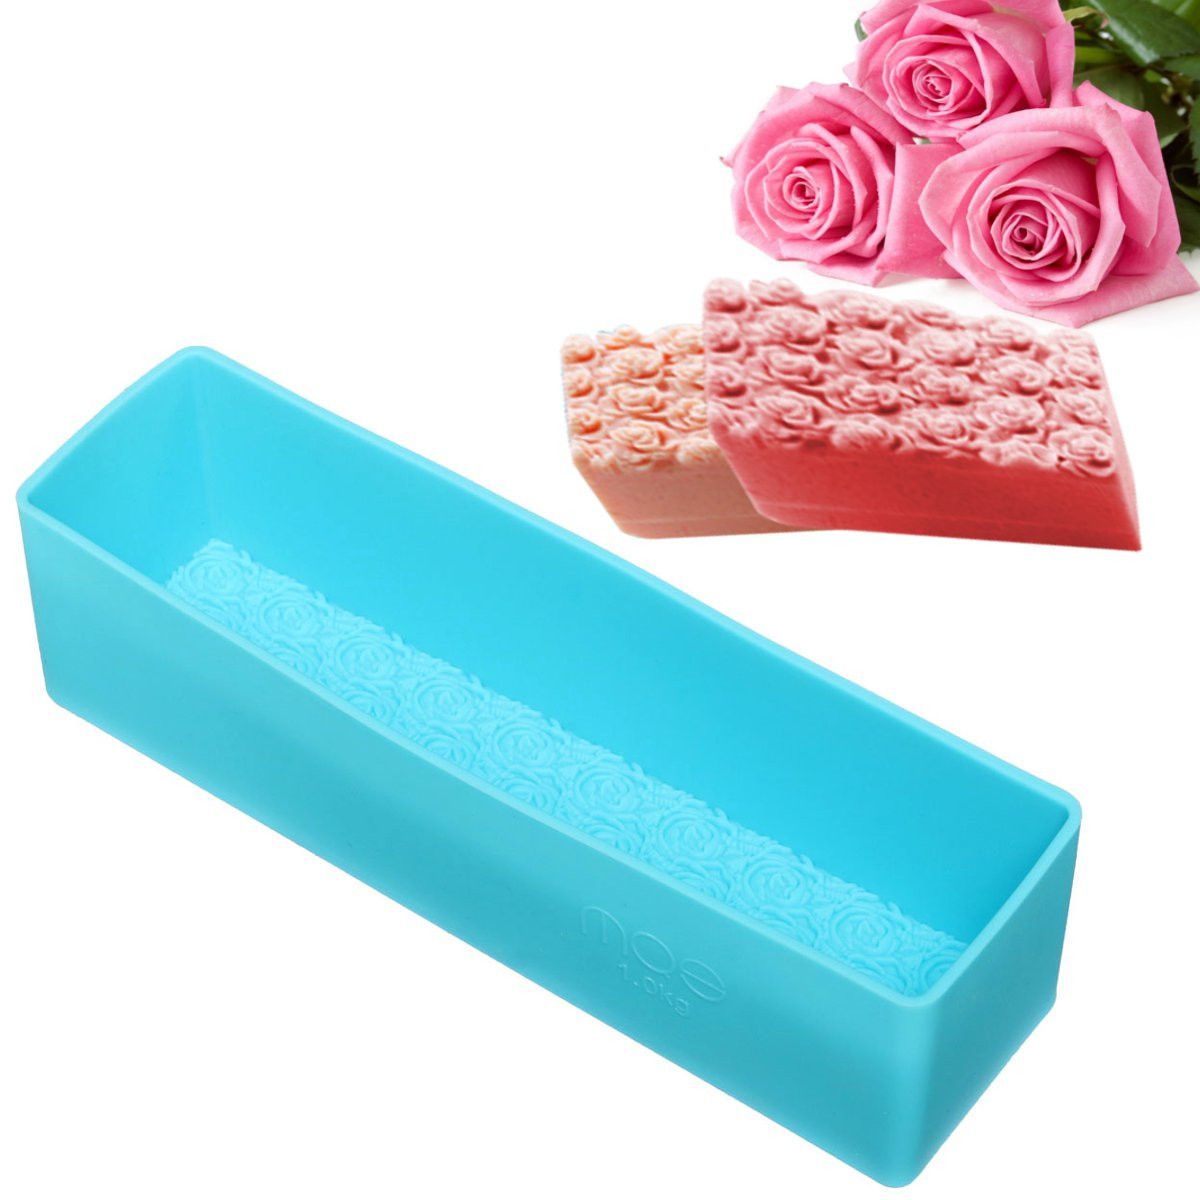 Rose-Toast-Silicone-Soap-Mold-Loaf-Cake-Baking-Bread-Tools-DIY-Chocolate-Mould-1525534